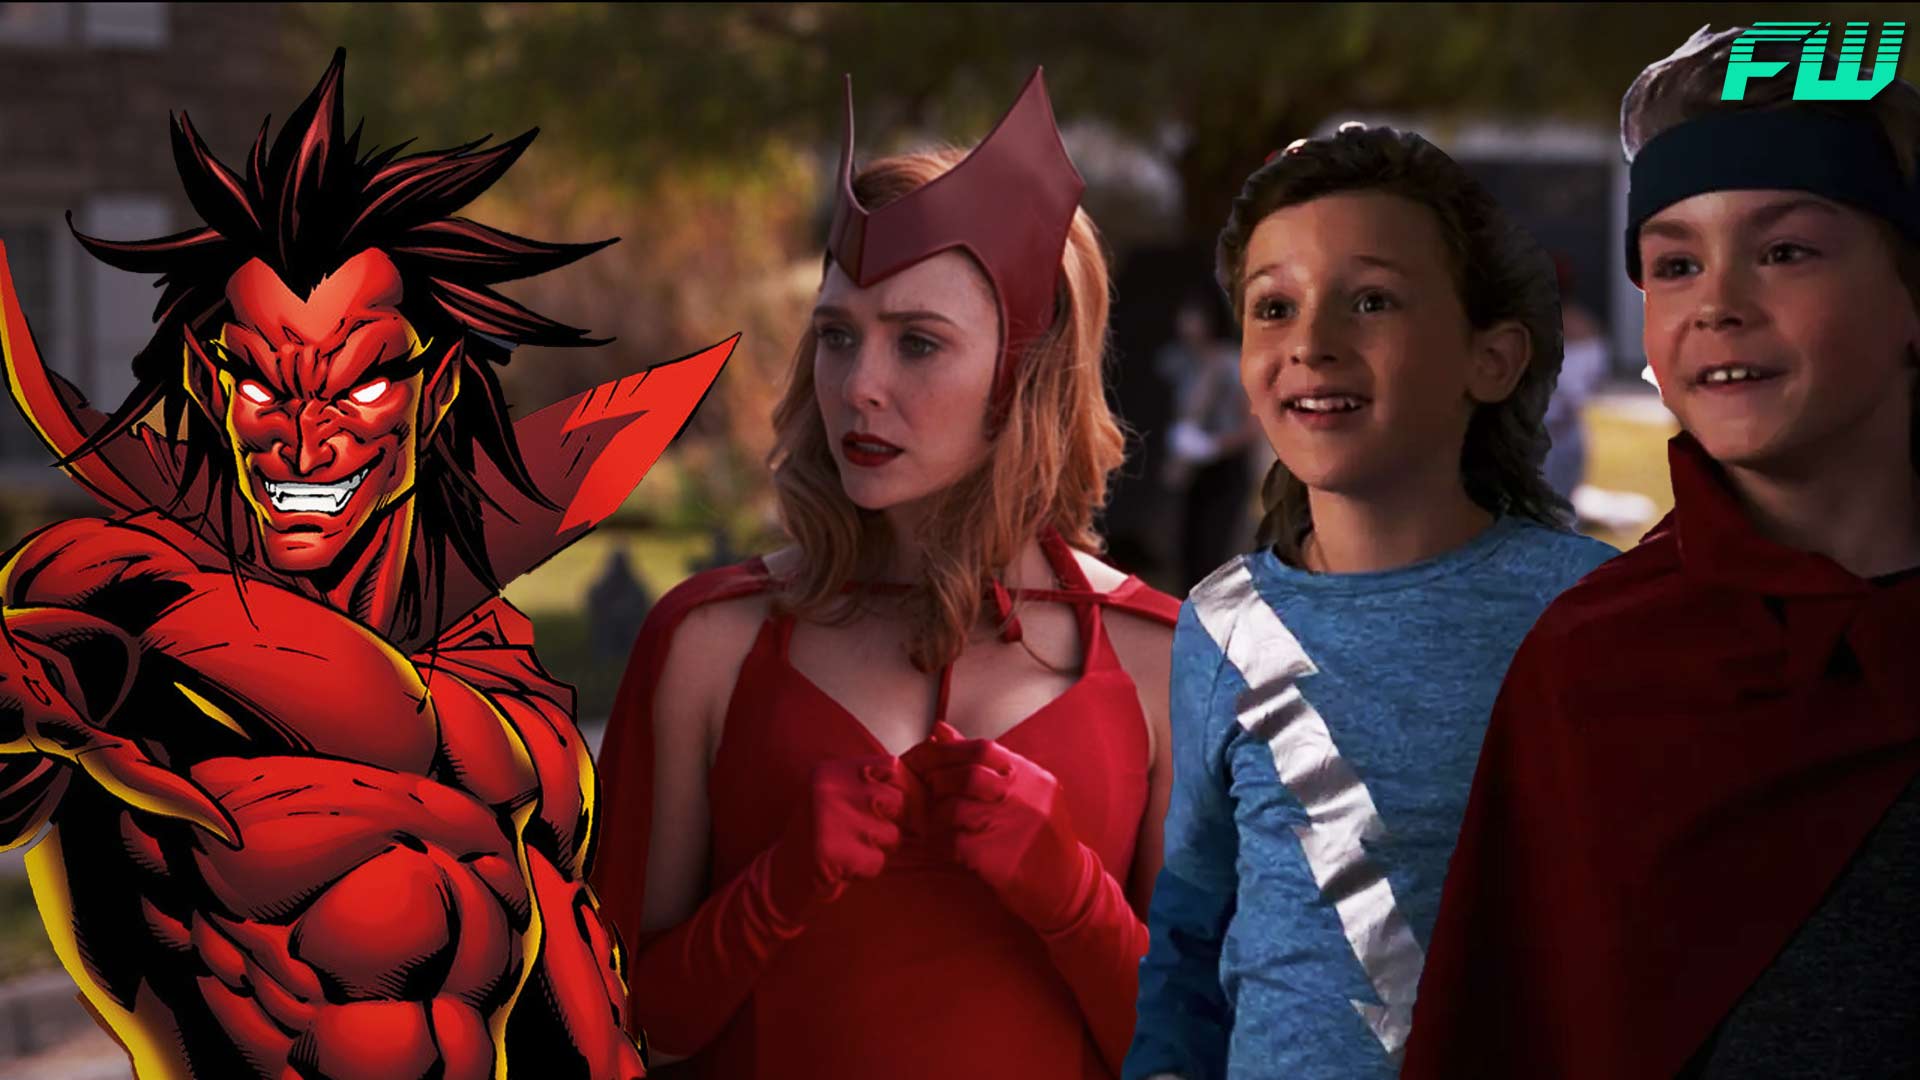 WandaVision Latest Episode Connects The Twins’ Origin To Mephisto